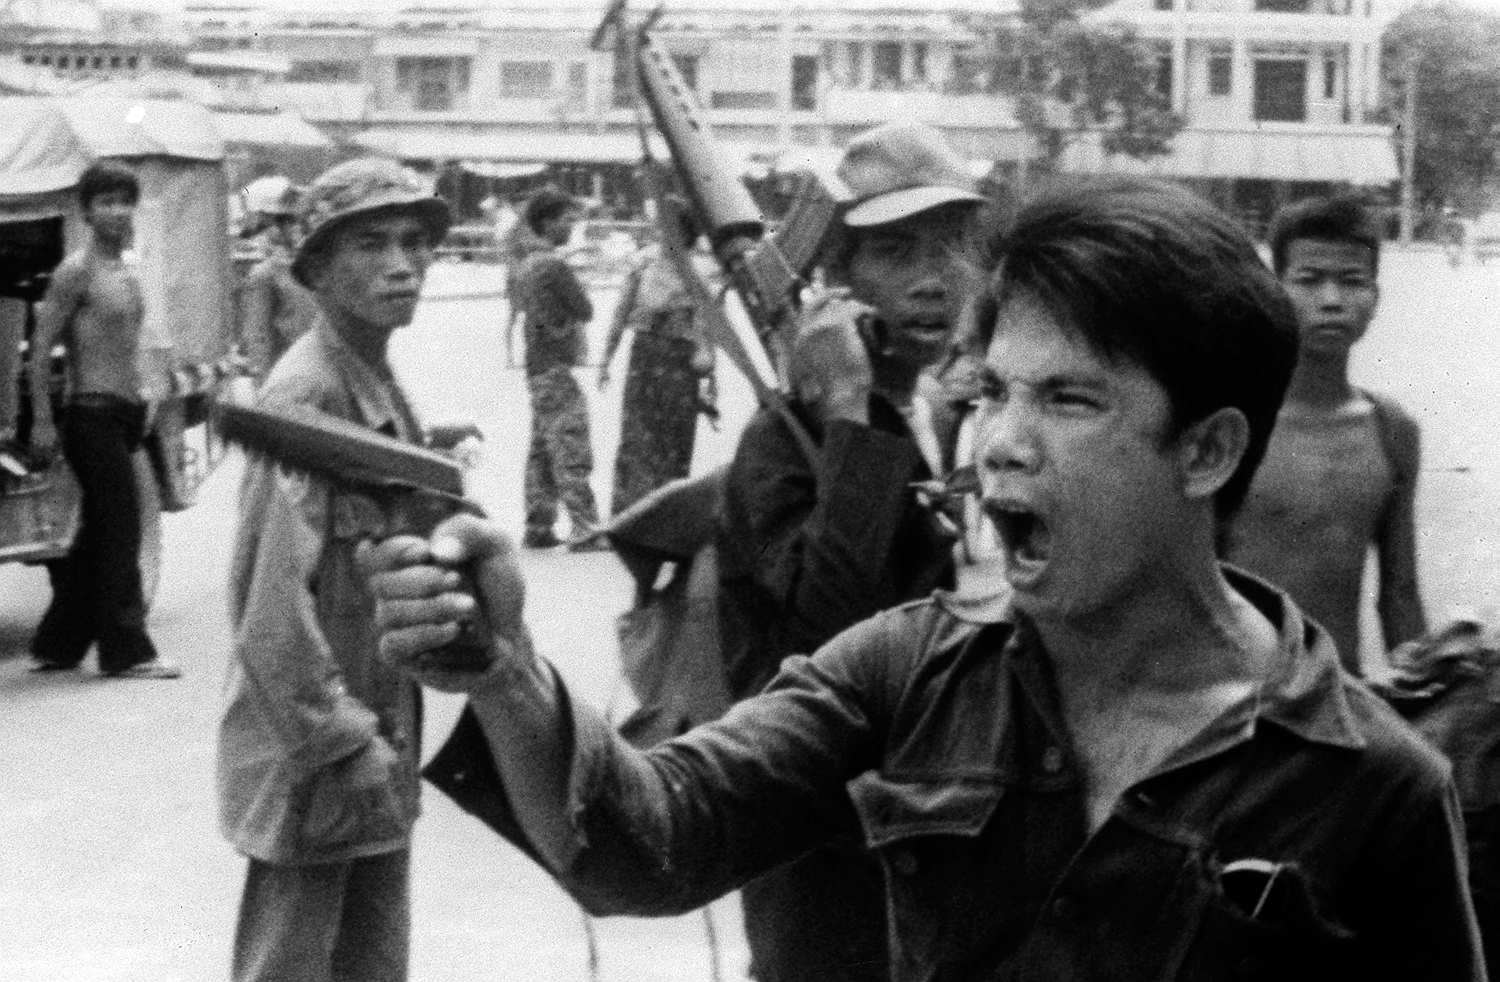 A Khmer Rouge soldier waves his pistol and orders store owners to abandon their shops in Phnom Penh, Cambodia, in 1975. The capital fell to the communist forces, and immediately all property and ownership ceased for its citizens. This was as the Khmer Rouge won the 8 year long Cambodia Civil War, but that did not stop the fighting or the killing. Under their leader Pol Pot, The Khmer Rouge were ruthless, and began a campaign of genocide against the people. While in full control of the country, the Khmer Rouge killed up to 3 million people in just 4 years. Over 23,000 mass graves have been discovered. Men, women, children, the Khmer Rouge killed them all. It got so bad that even Vietnam invaded Cambodia, despite both being communist, and eventually the Khmer Rouge lost control of the country. However they would continue to fight a guerilla war even holding key areas of the country until finally being defeated 20 years later in 1999.